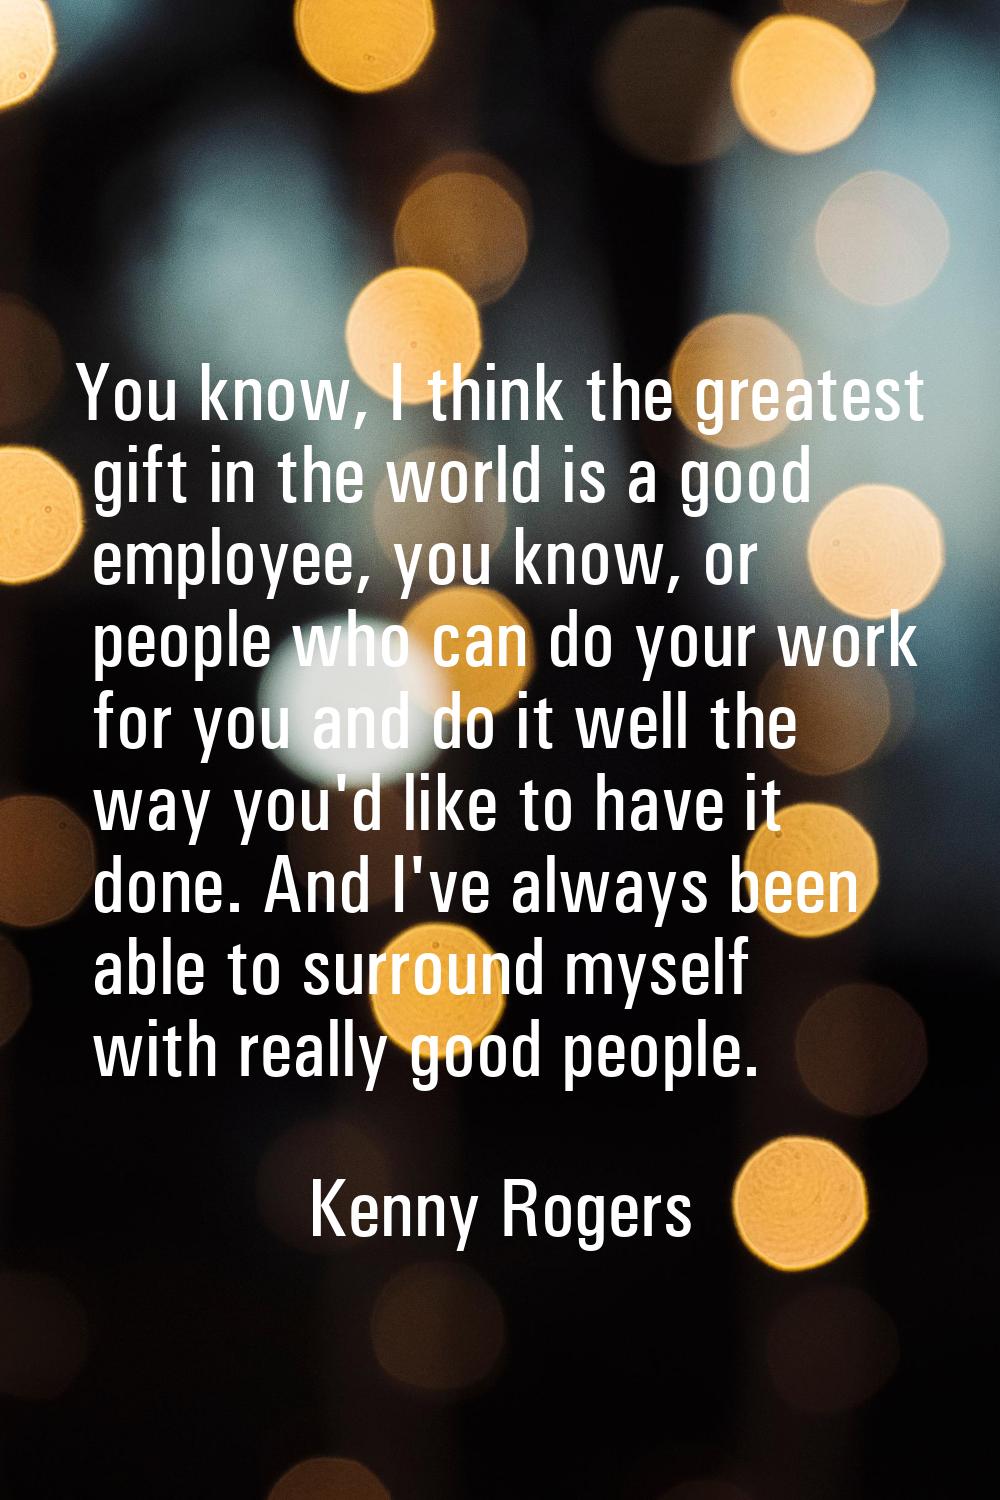 You know, I think the greatest gift in the world is a good employee, you know, or people who can do